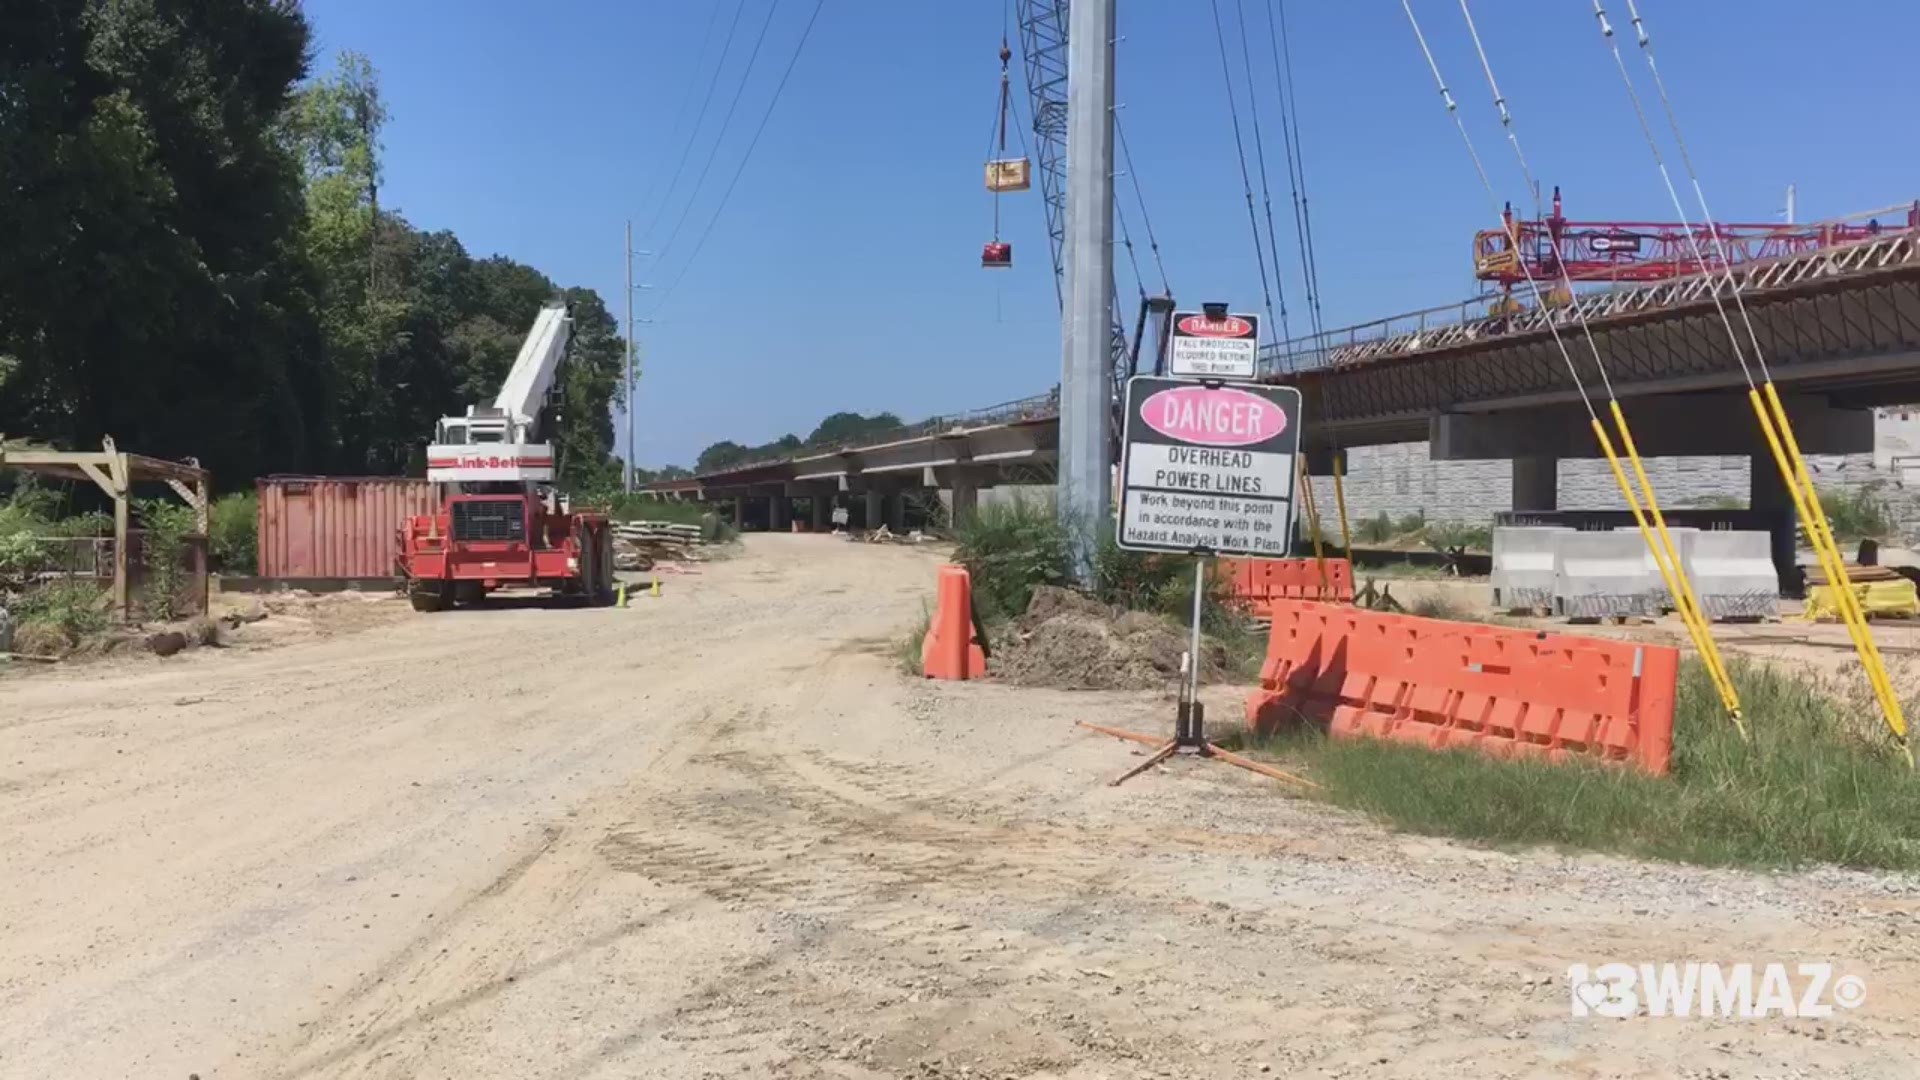 A construction worker is in critical condition at Navicent Health after falling almost 30 feet from a metal bridge into a concrete drainage ditch.